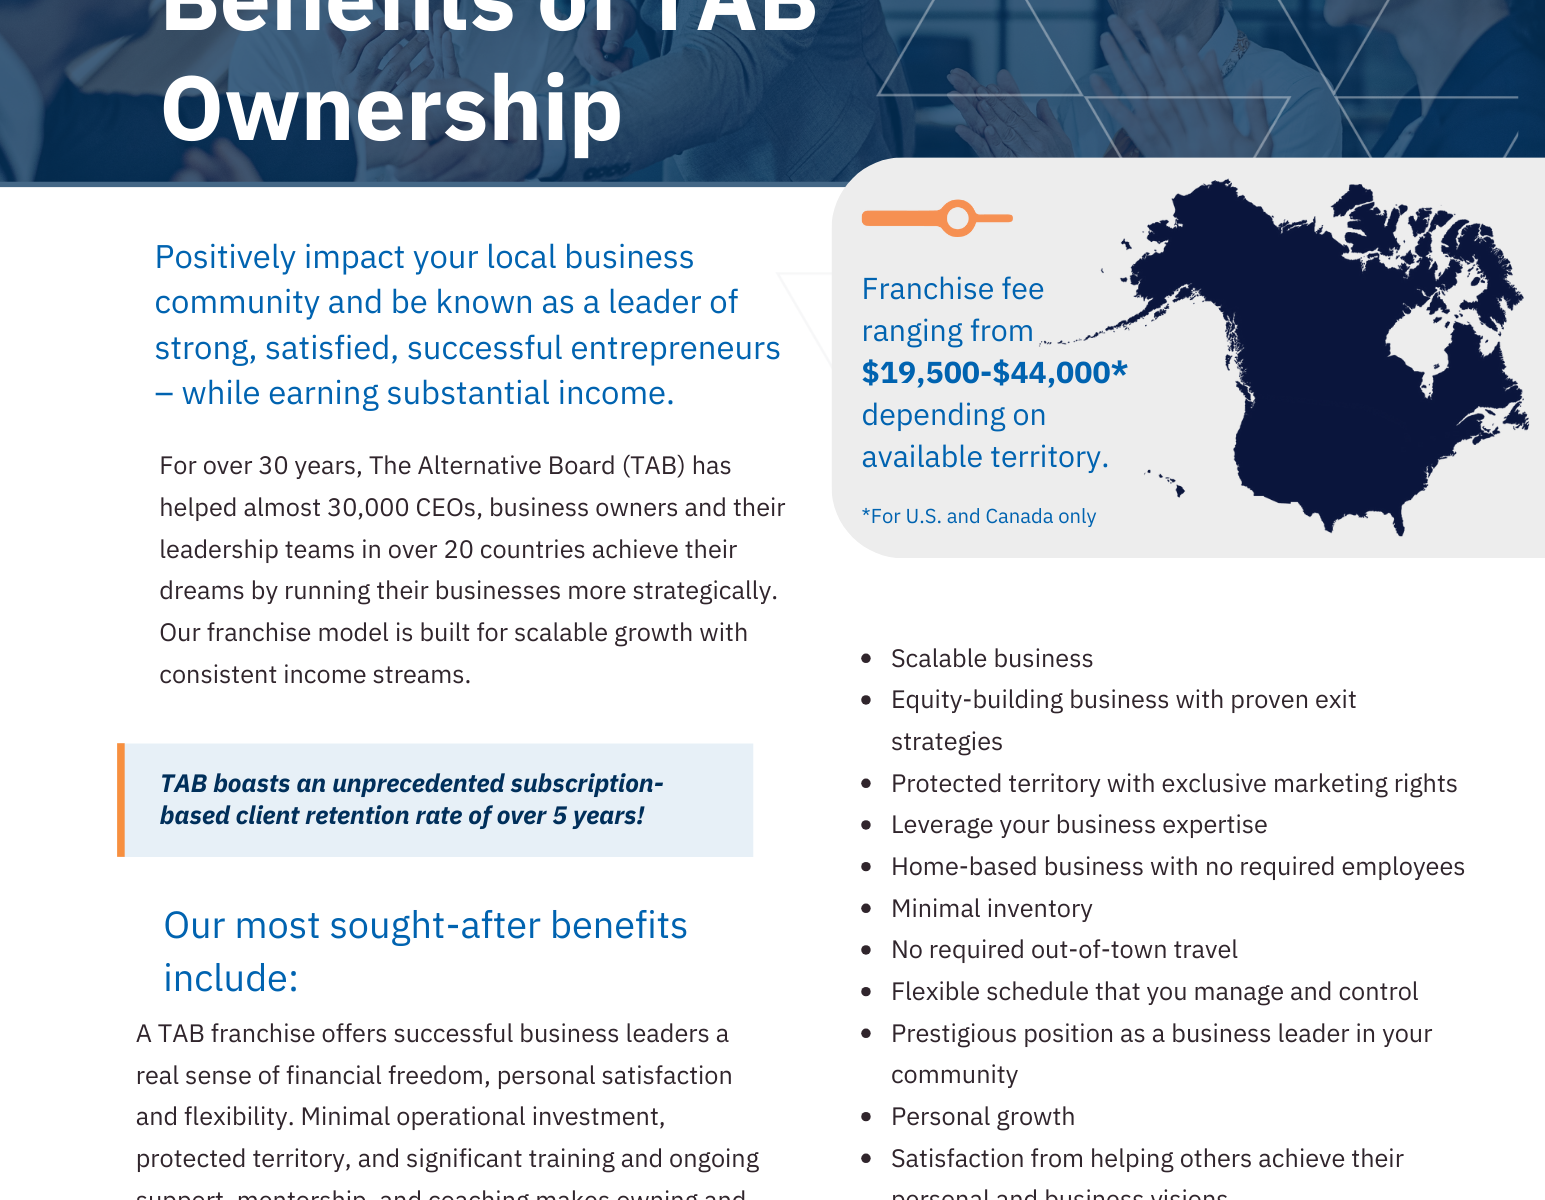 Benefits of TAB Ownership